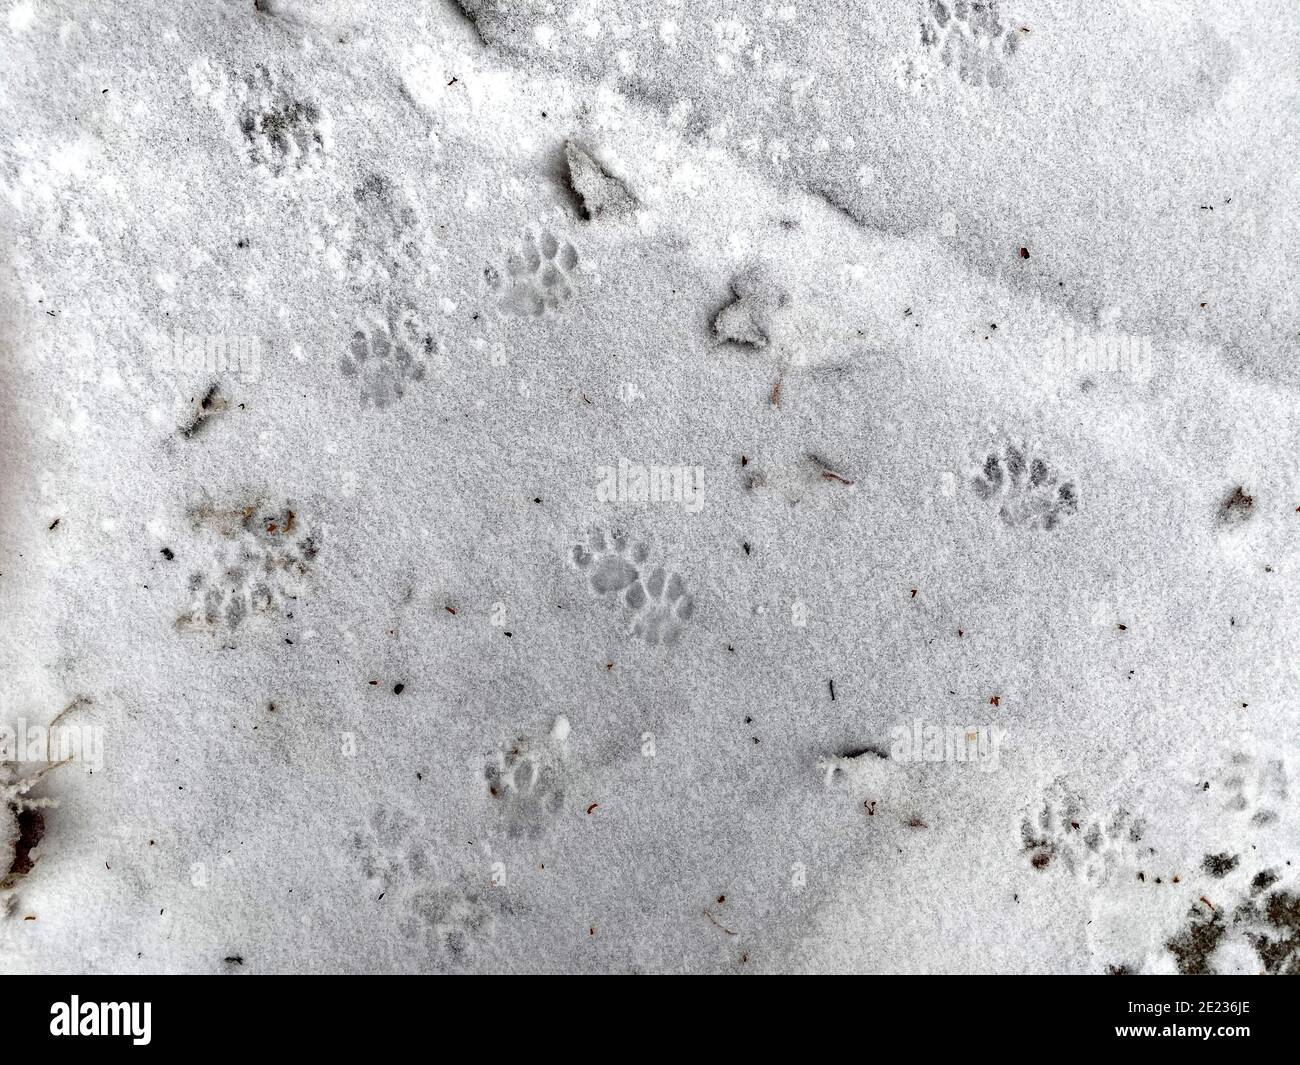 Cat tracks on the first snow. Snow grains on the ground, cat paw prints in the snow. Stock Photo